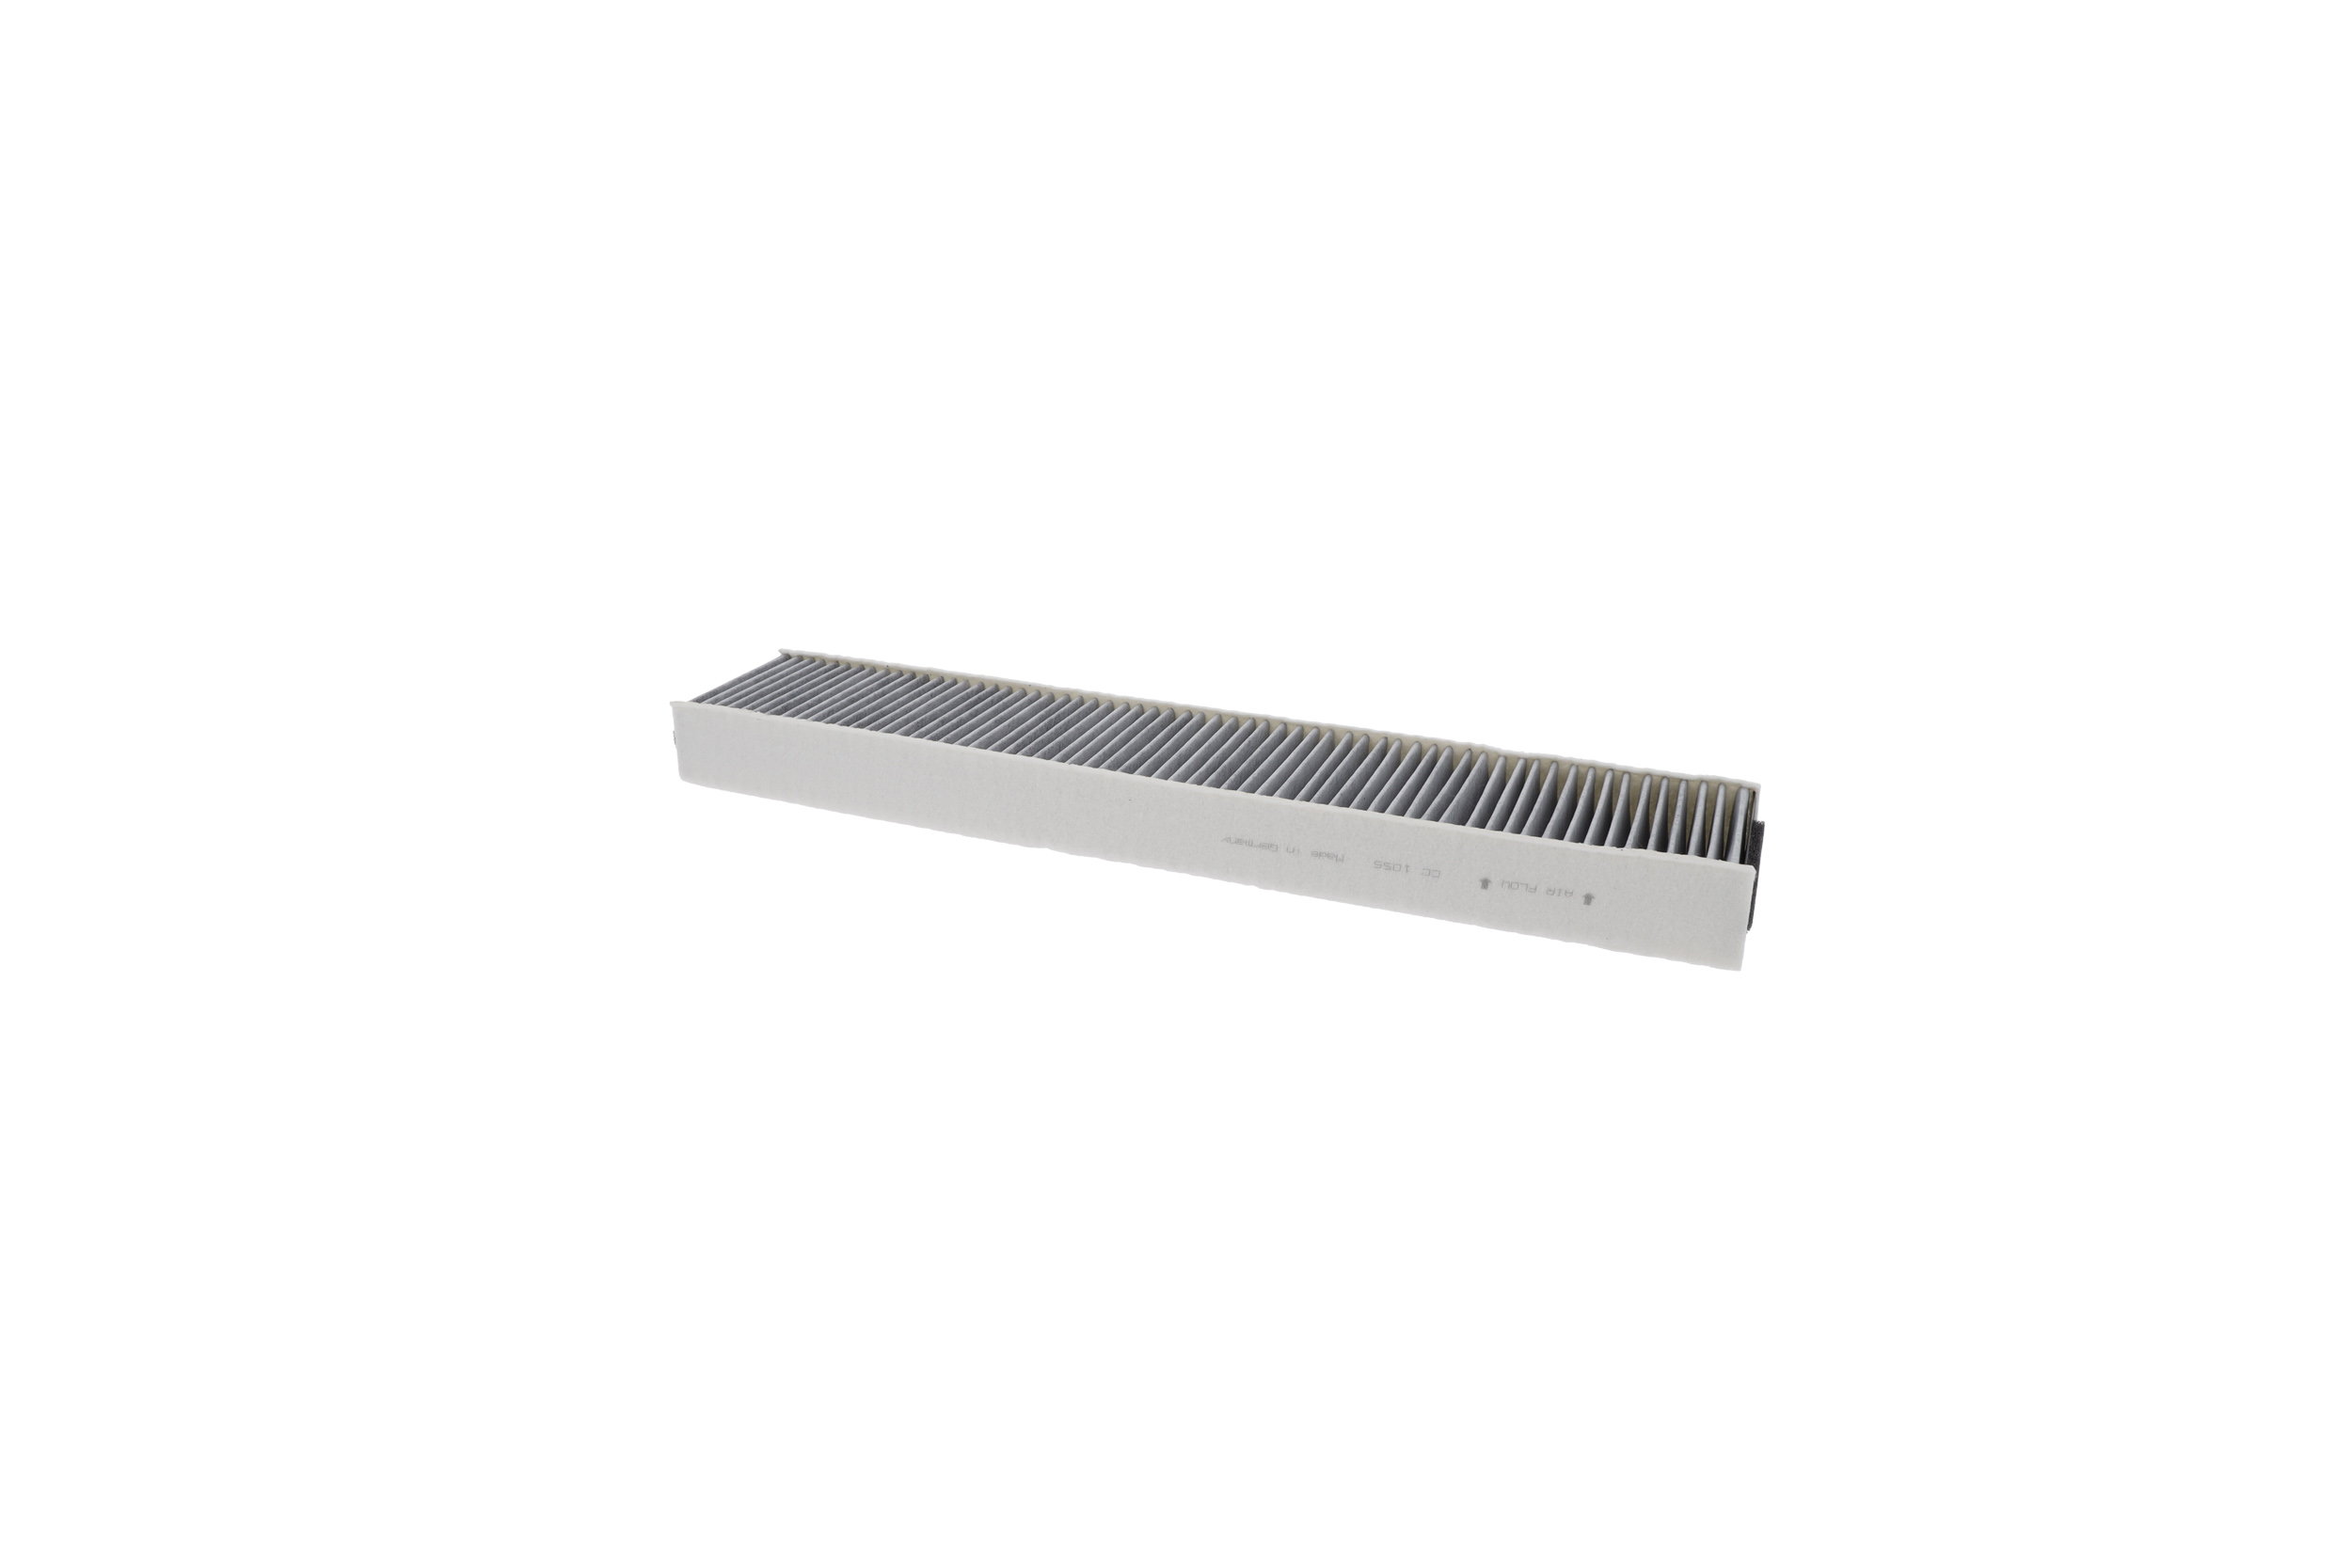 CORTECO Activated Carbon Filter, 498 mm x 98 mm x 43 mm Width: 98mm, Height: 43mm, Length: 498mm Cabin filter 80000382 buy